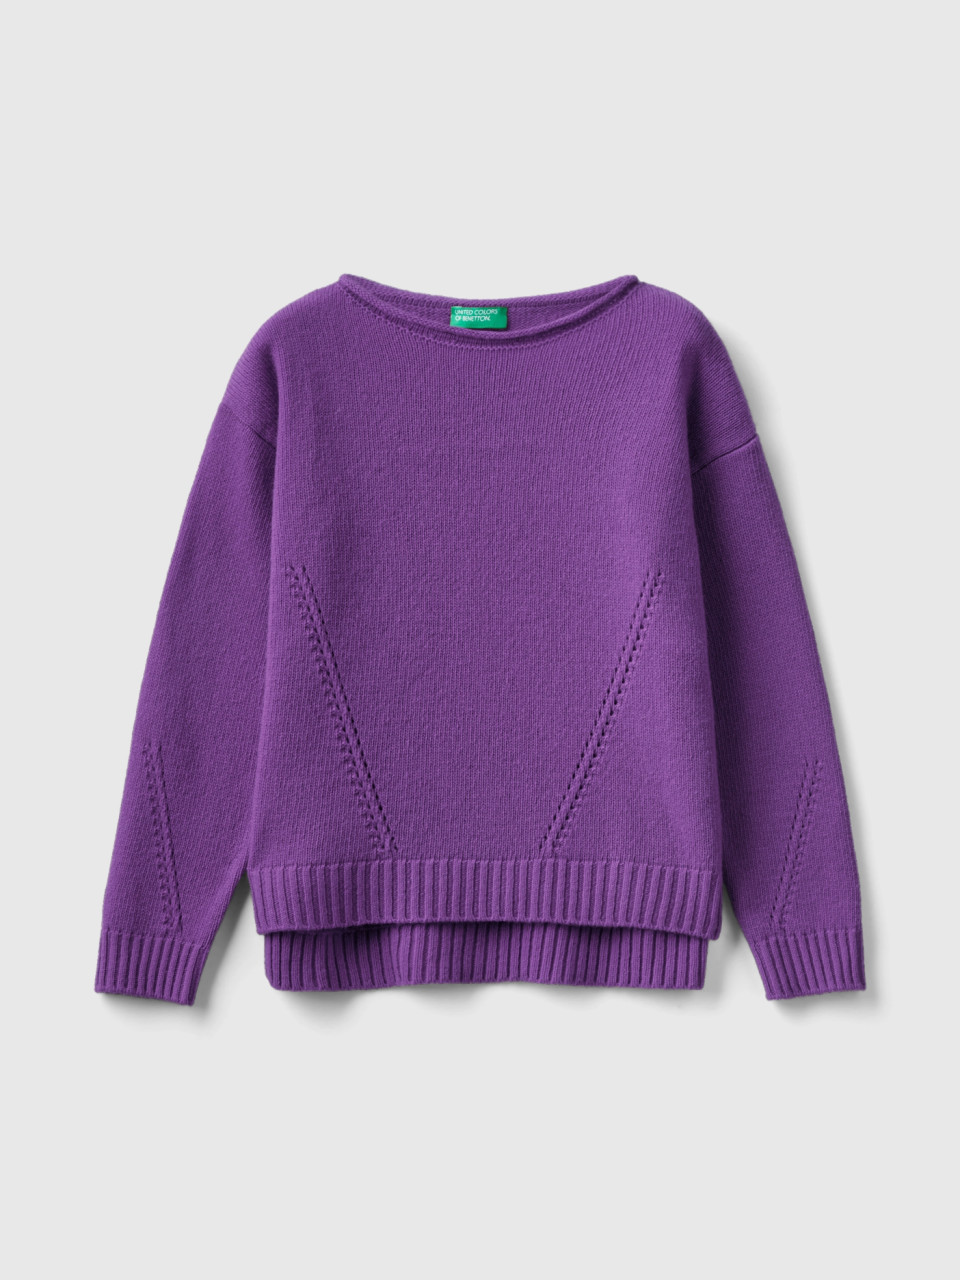 Benetton, Knit Sweater With Playful Stitching, Violet, Kids